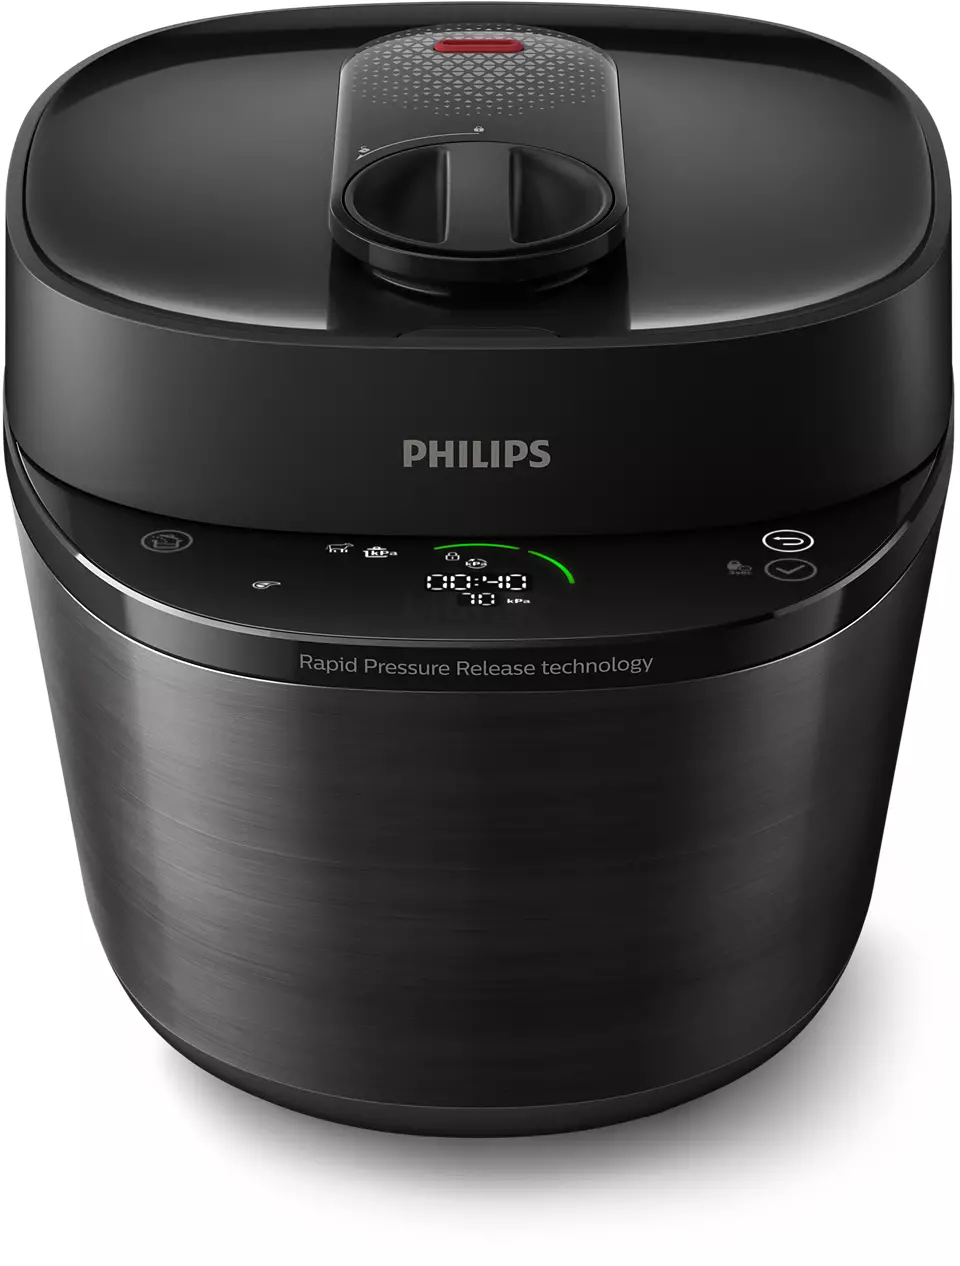 Philips All-in-One Cooker Pressurized HD2151/80